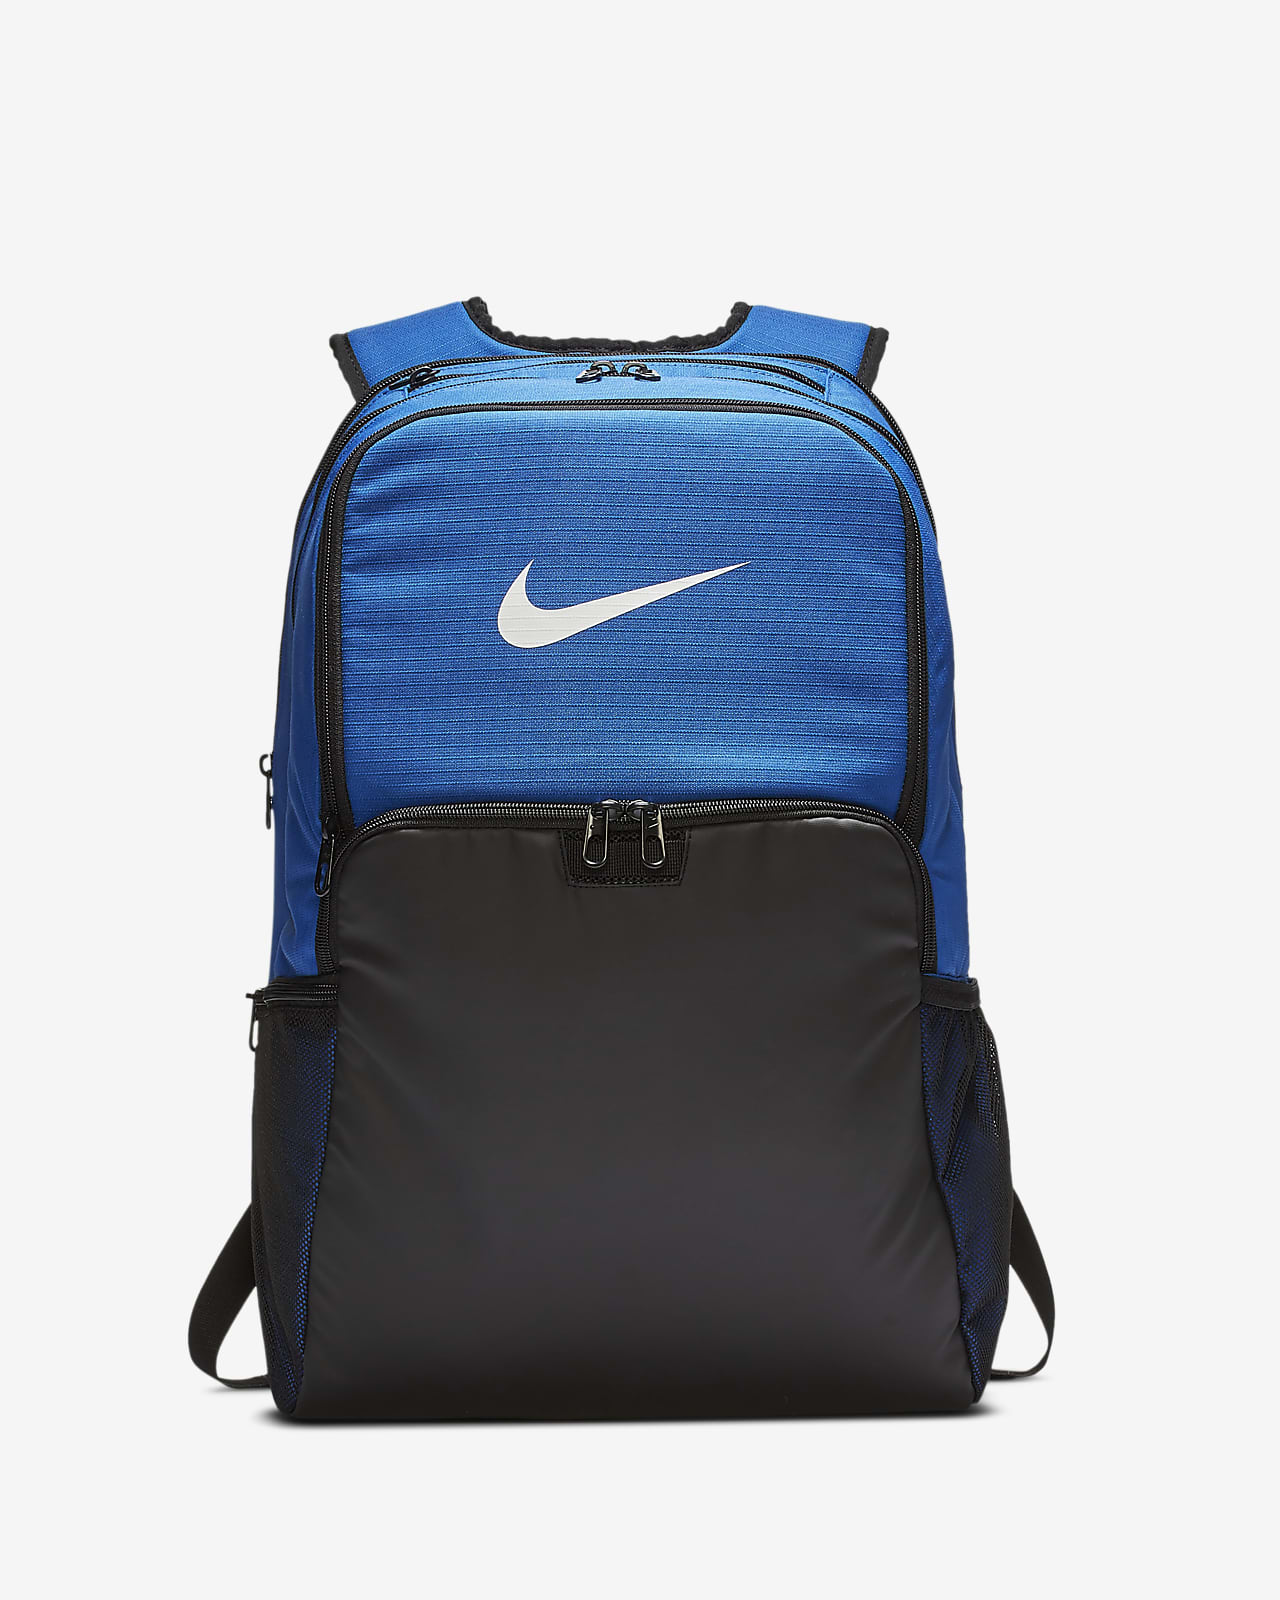 nike backpack with side pockets